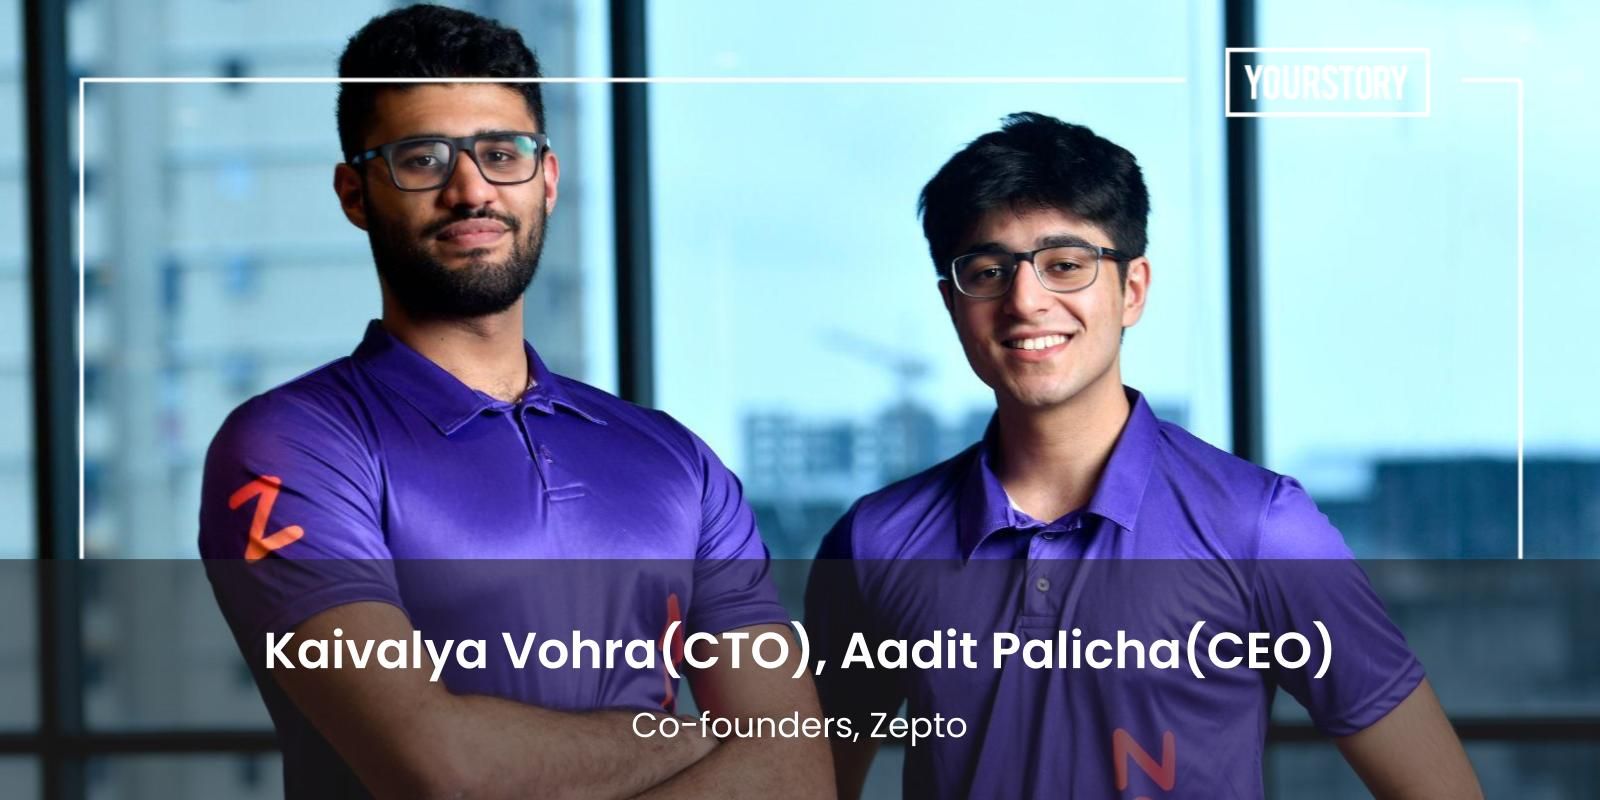 [Funding alert] Grocery delivery startup Zepto raises $60M as early-stage round at $225M valuation